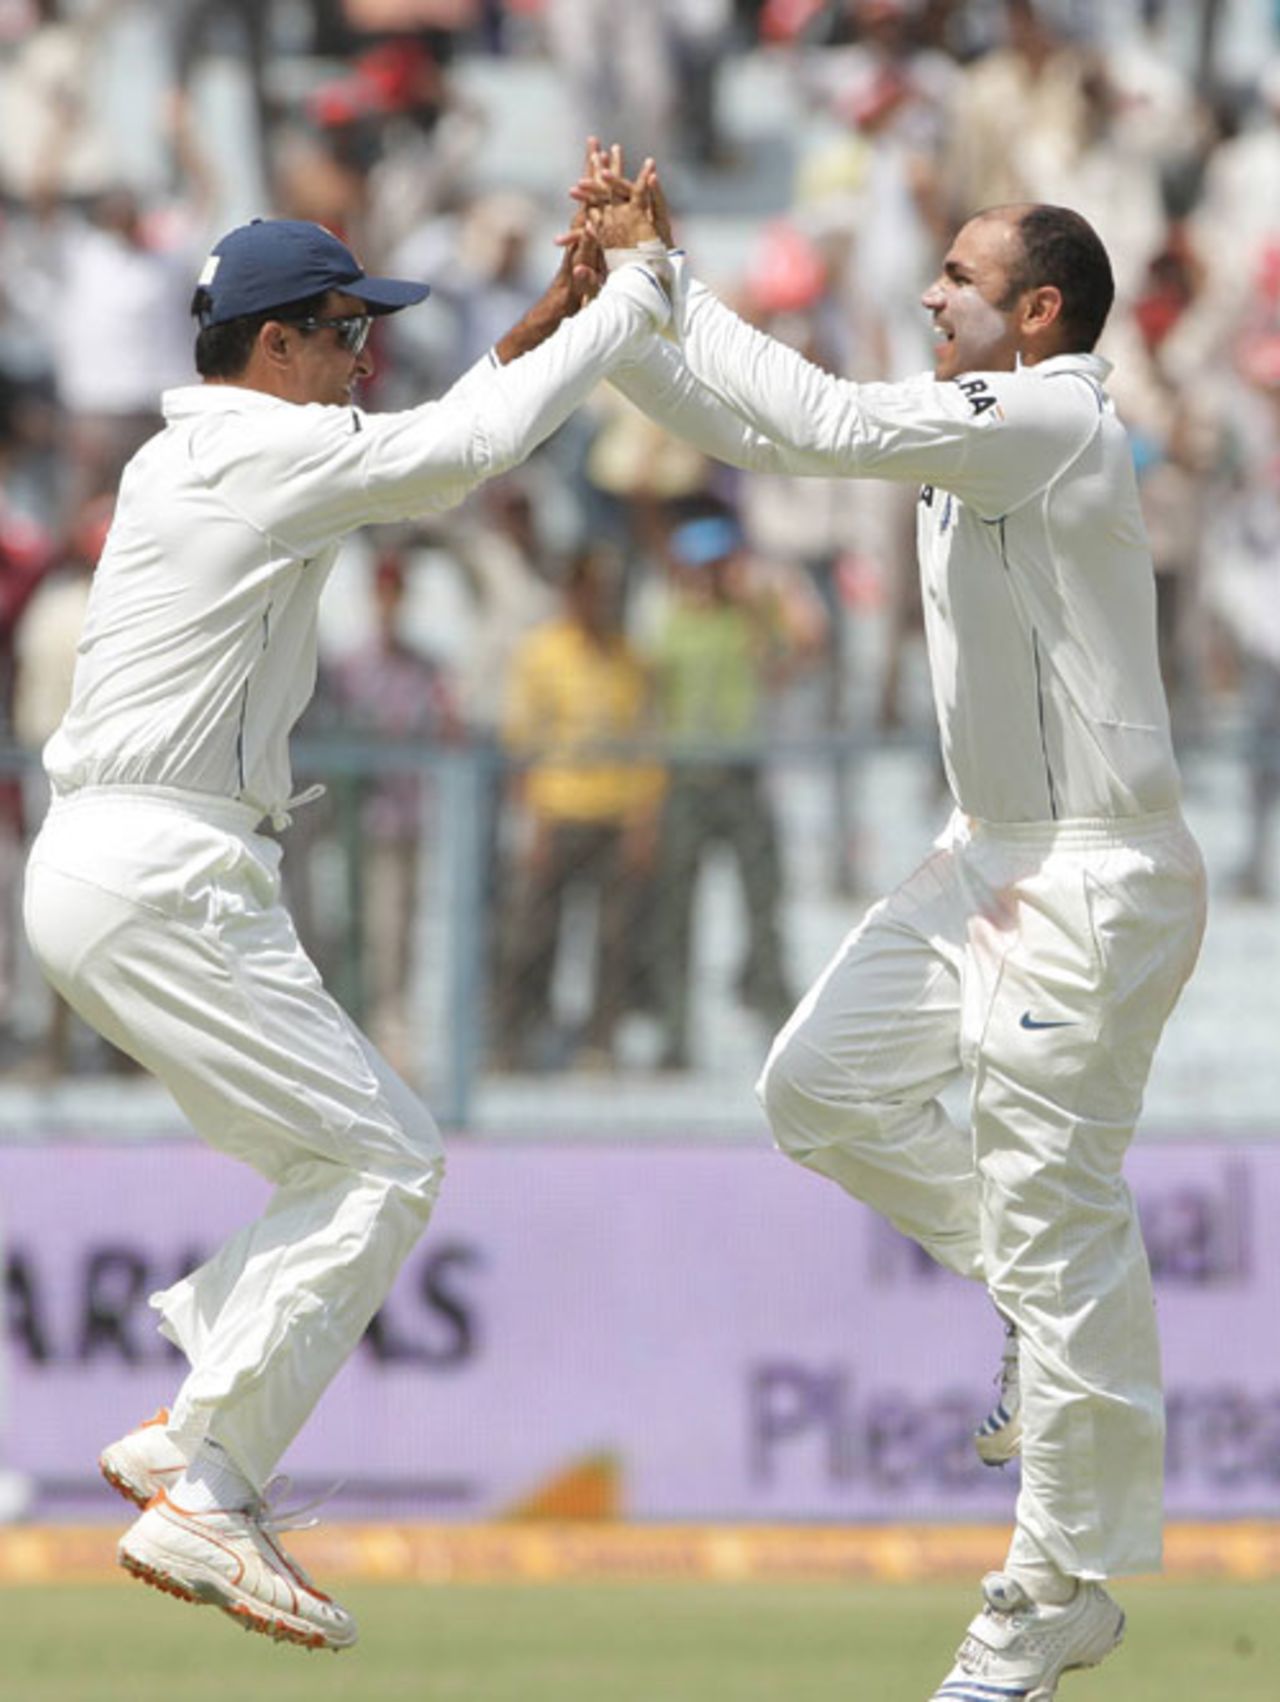 Sourav Ganguly and Virender Sehwag exchange high-fives after a strike, India v South Africa, 3rd Test, Kanpur, 3rd day, April 13, 2008